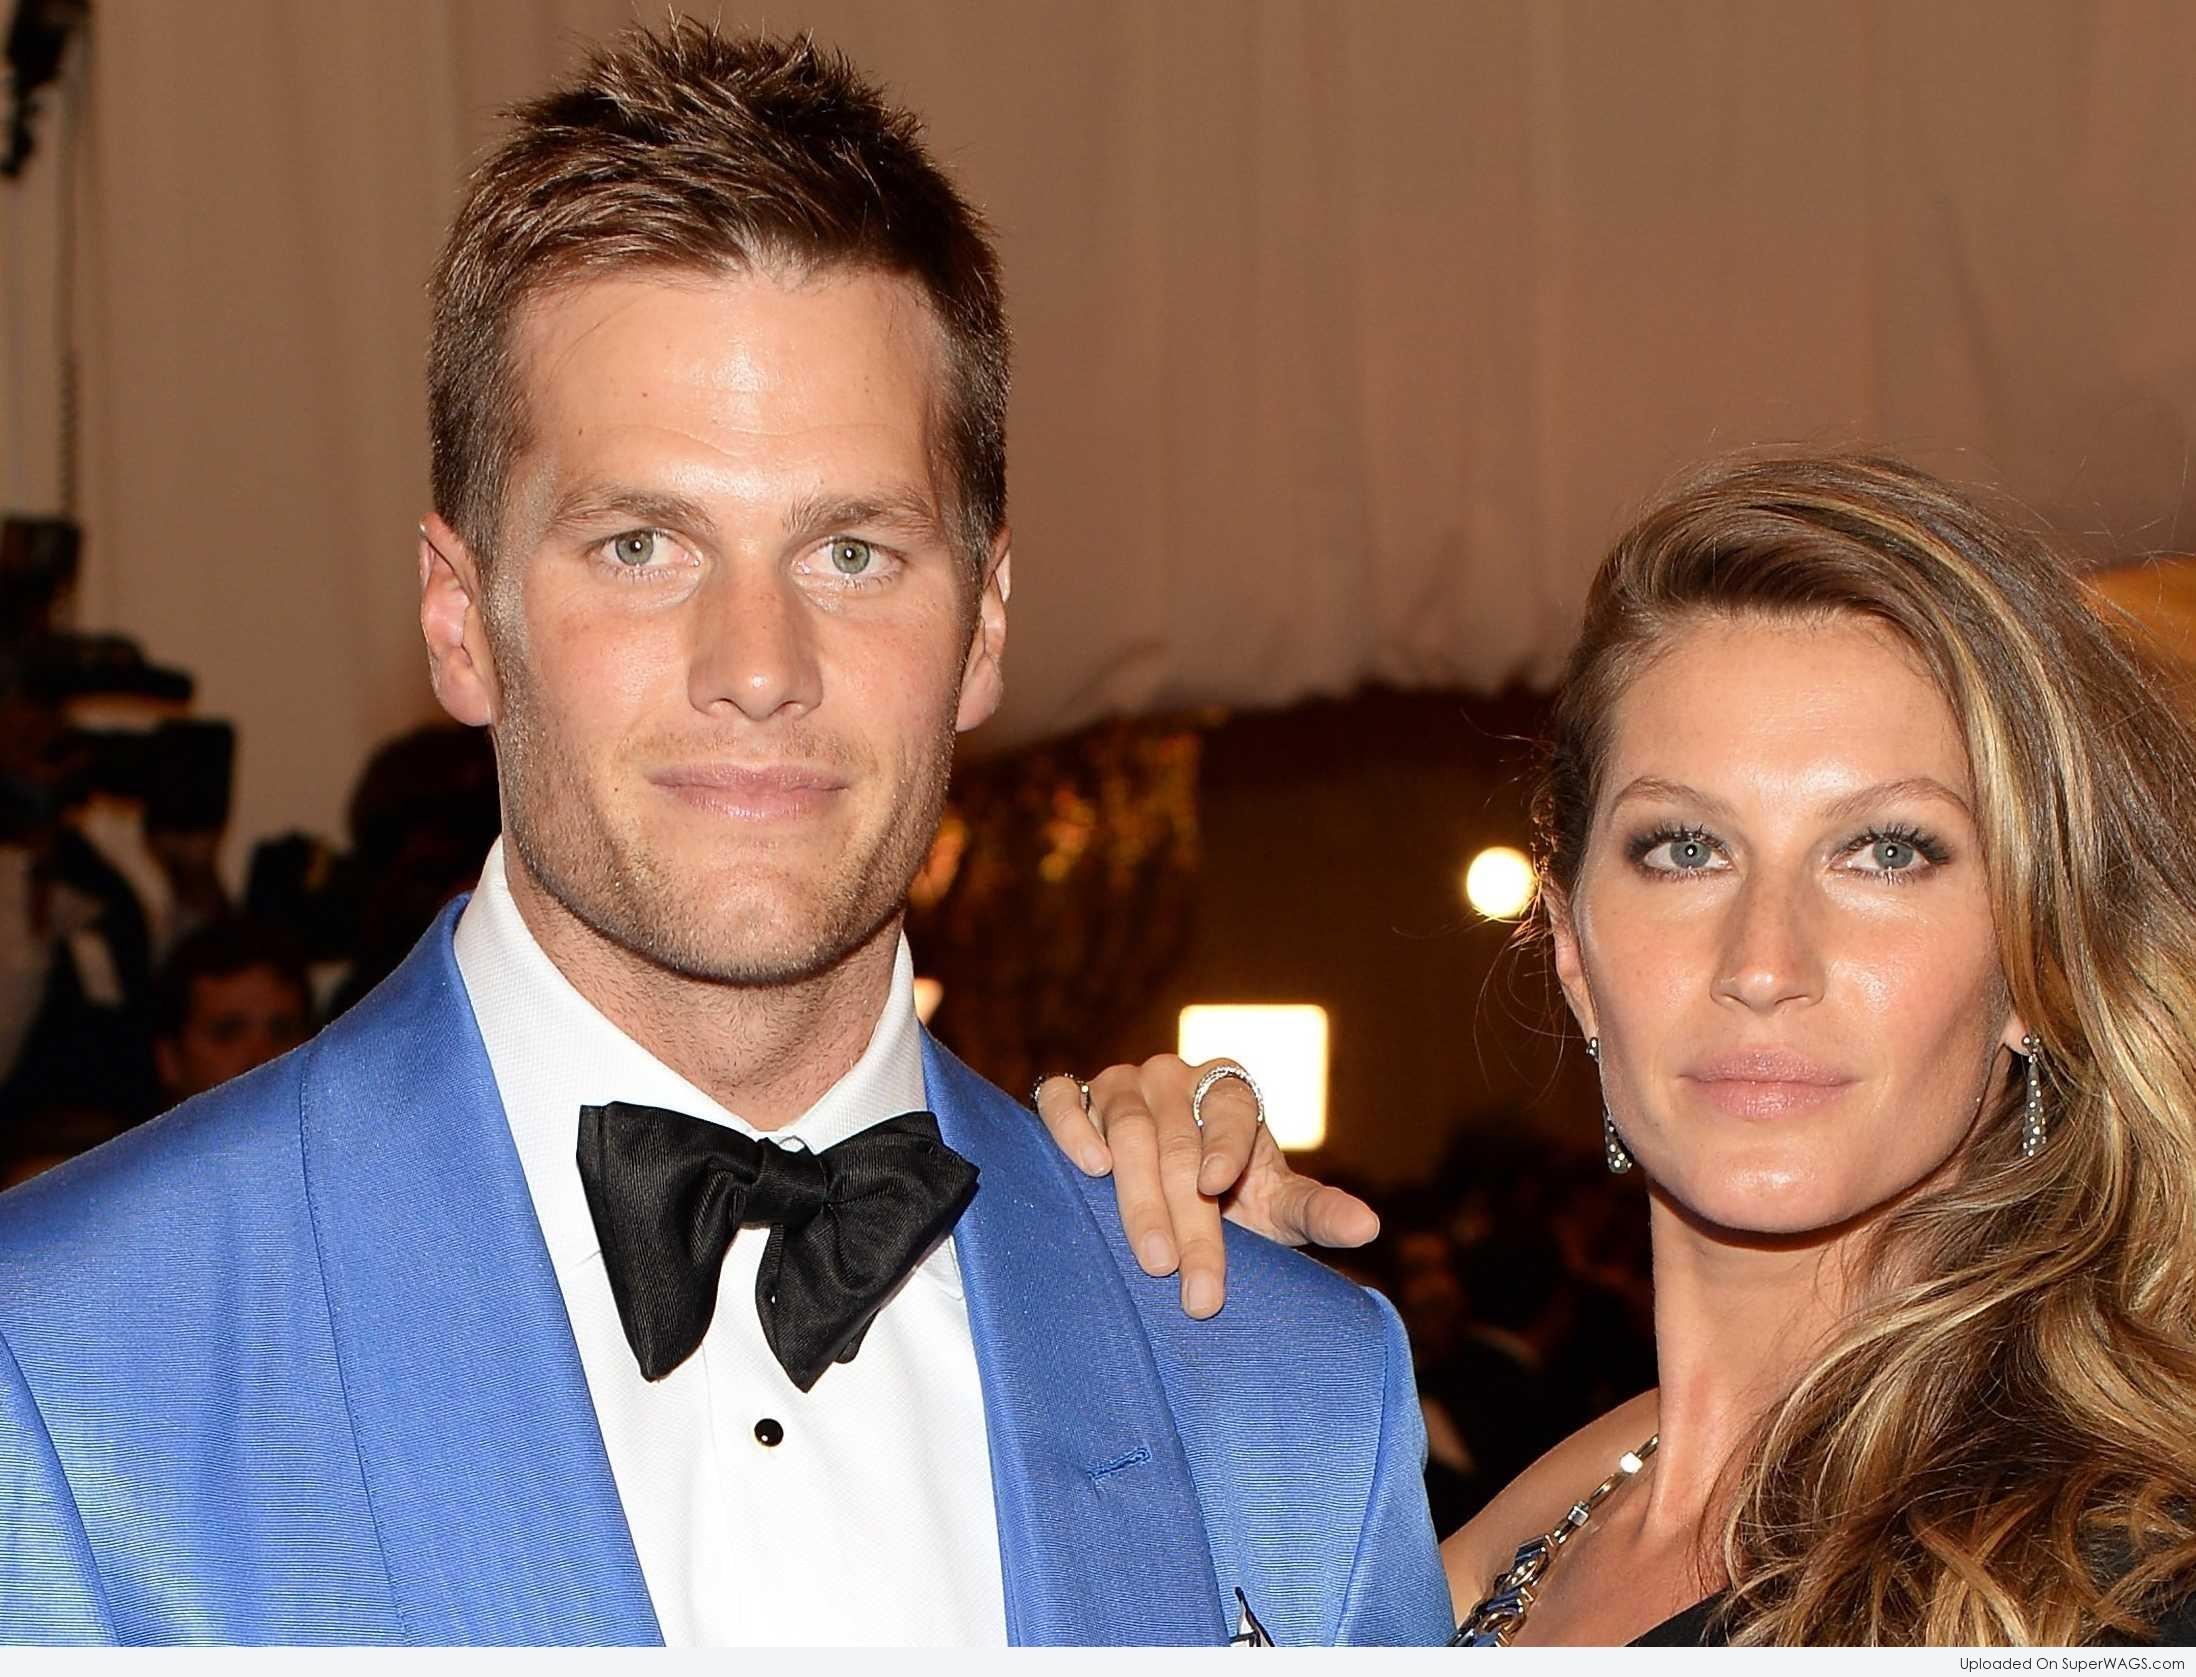 Tom Brady with his wife Gisele Bundchen Super WAGS Hottest Wives